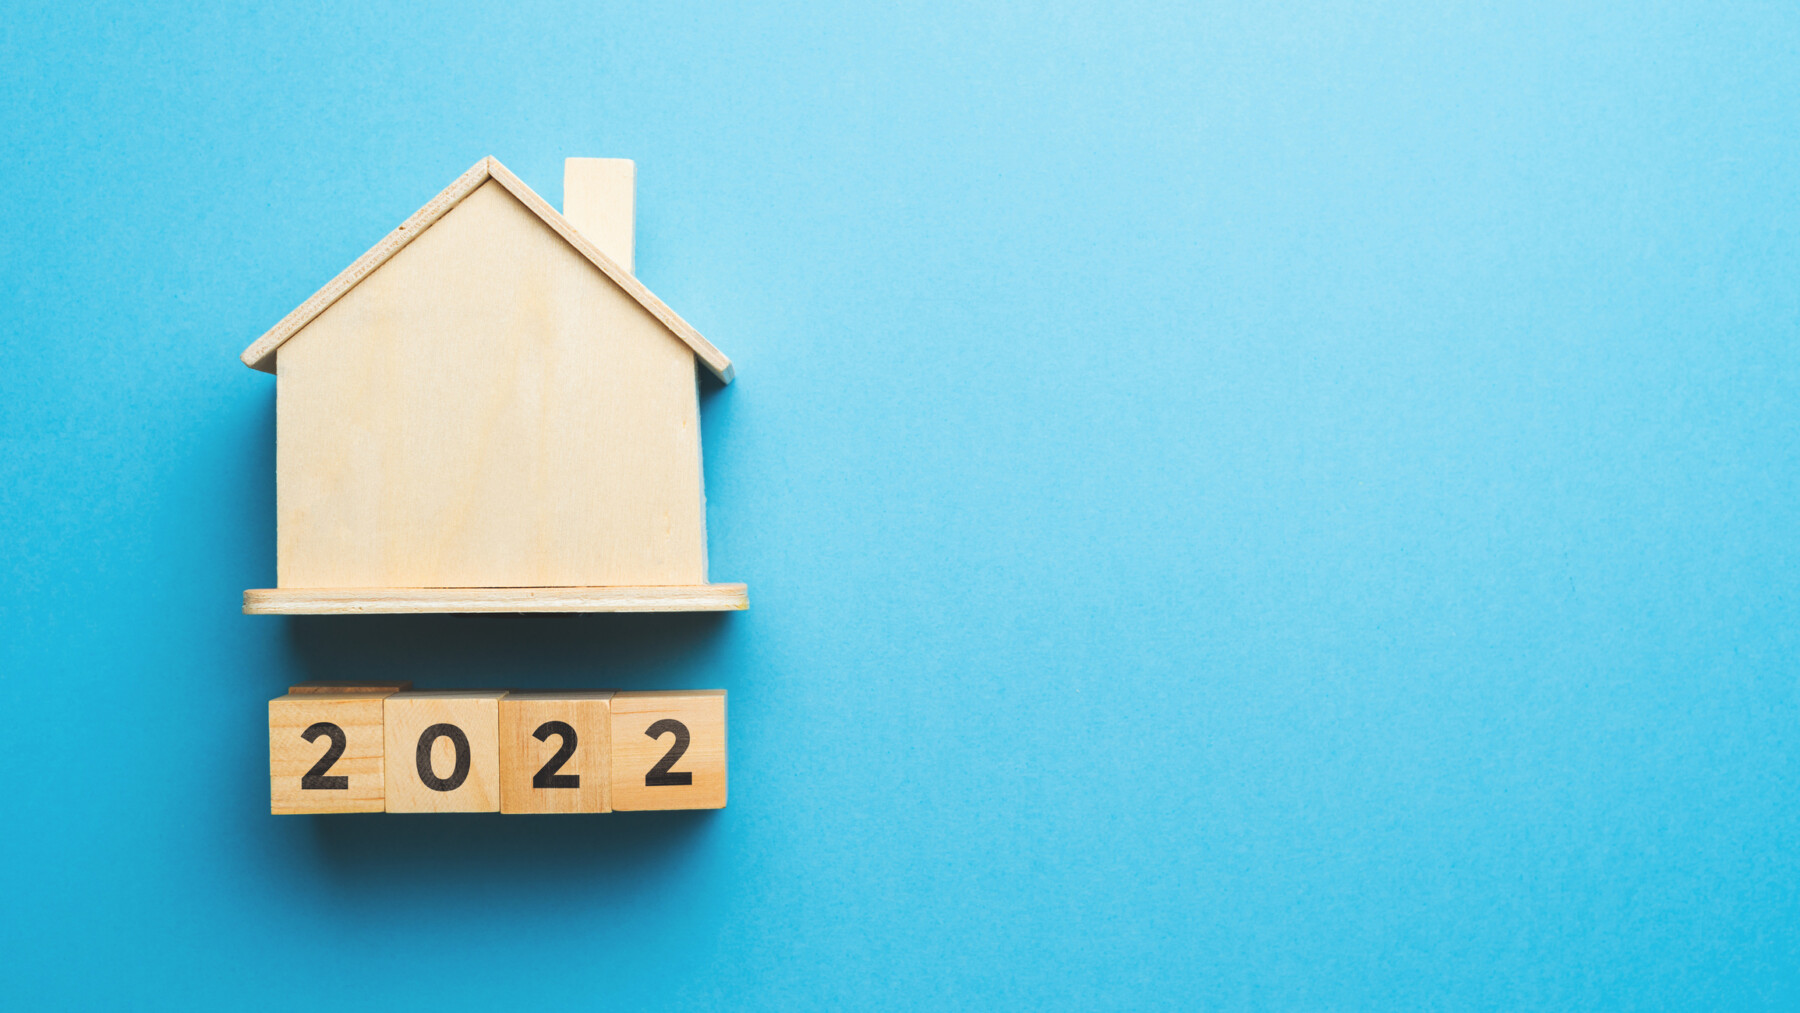 5 Long Island Housing Market Predictions for 2022